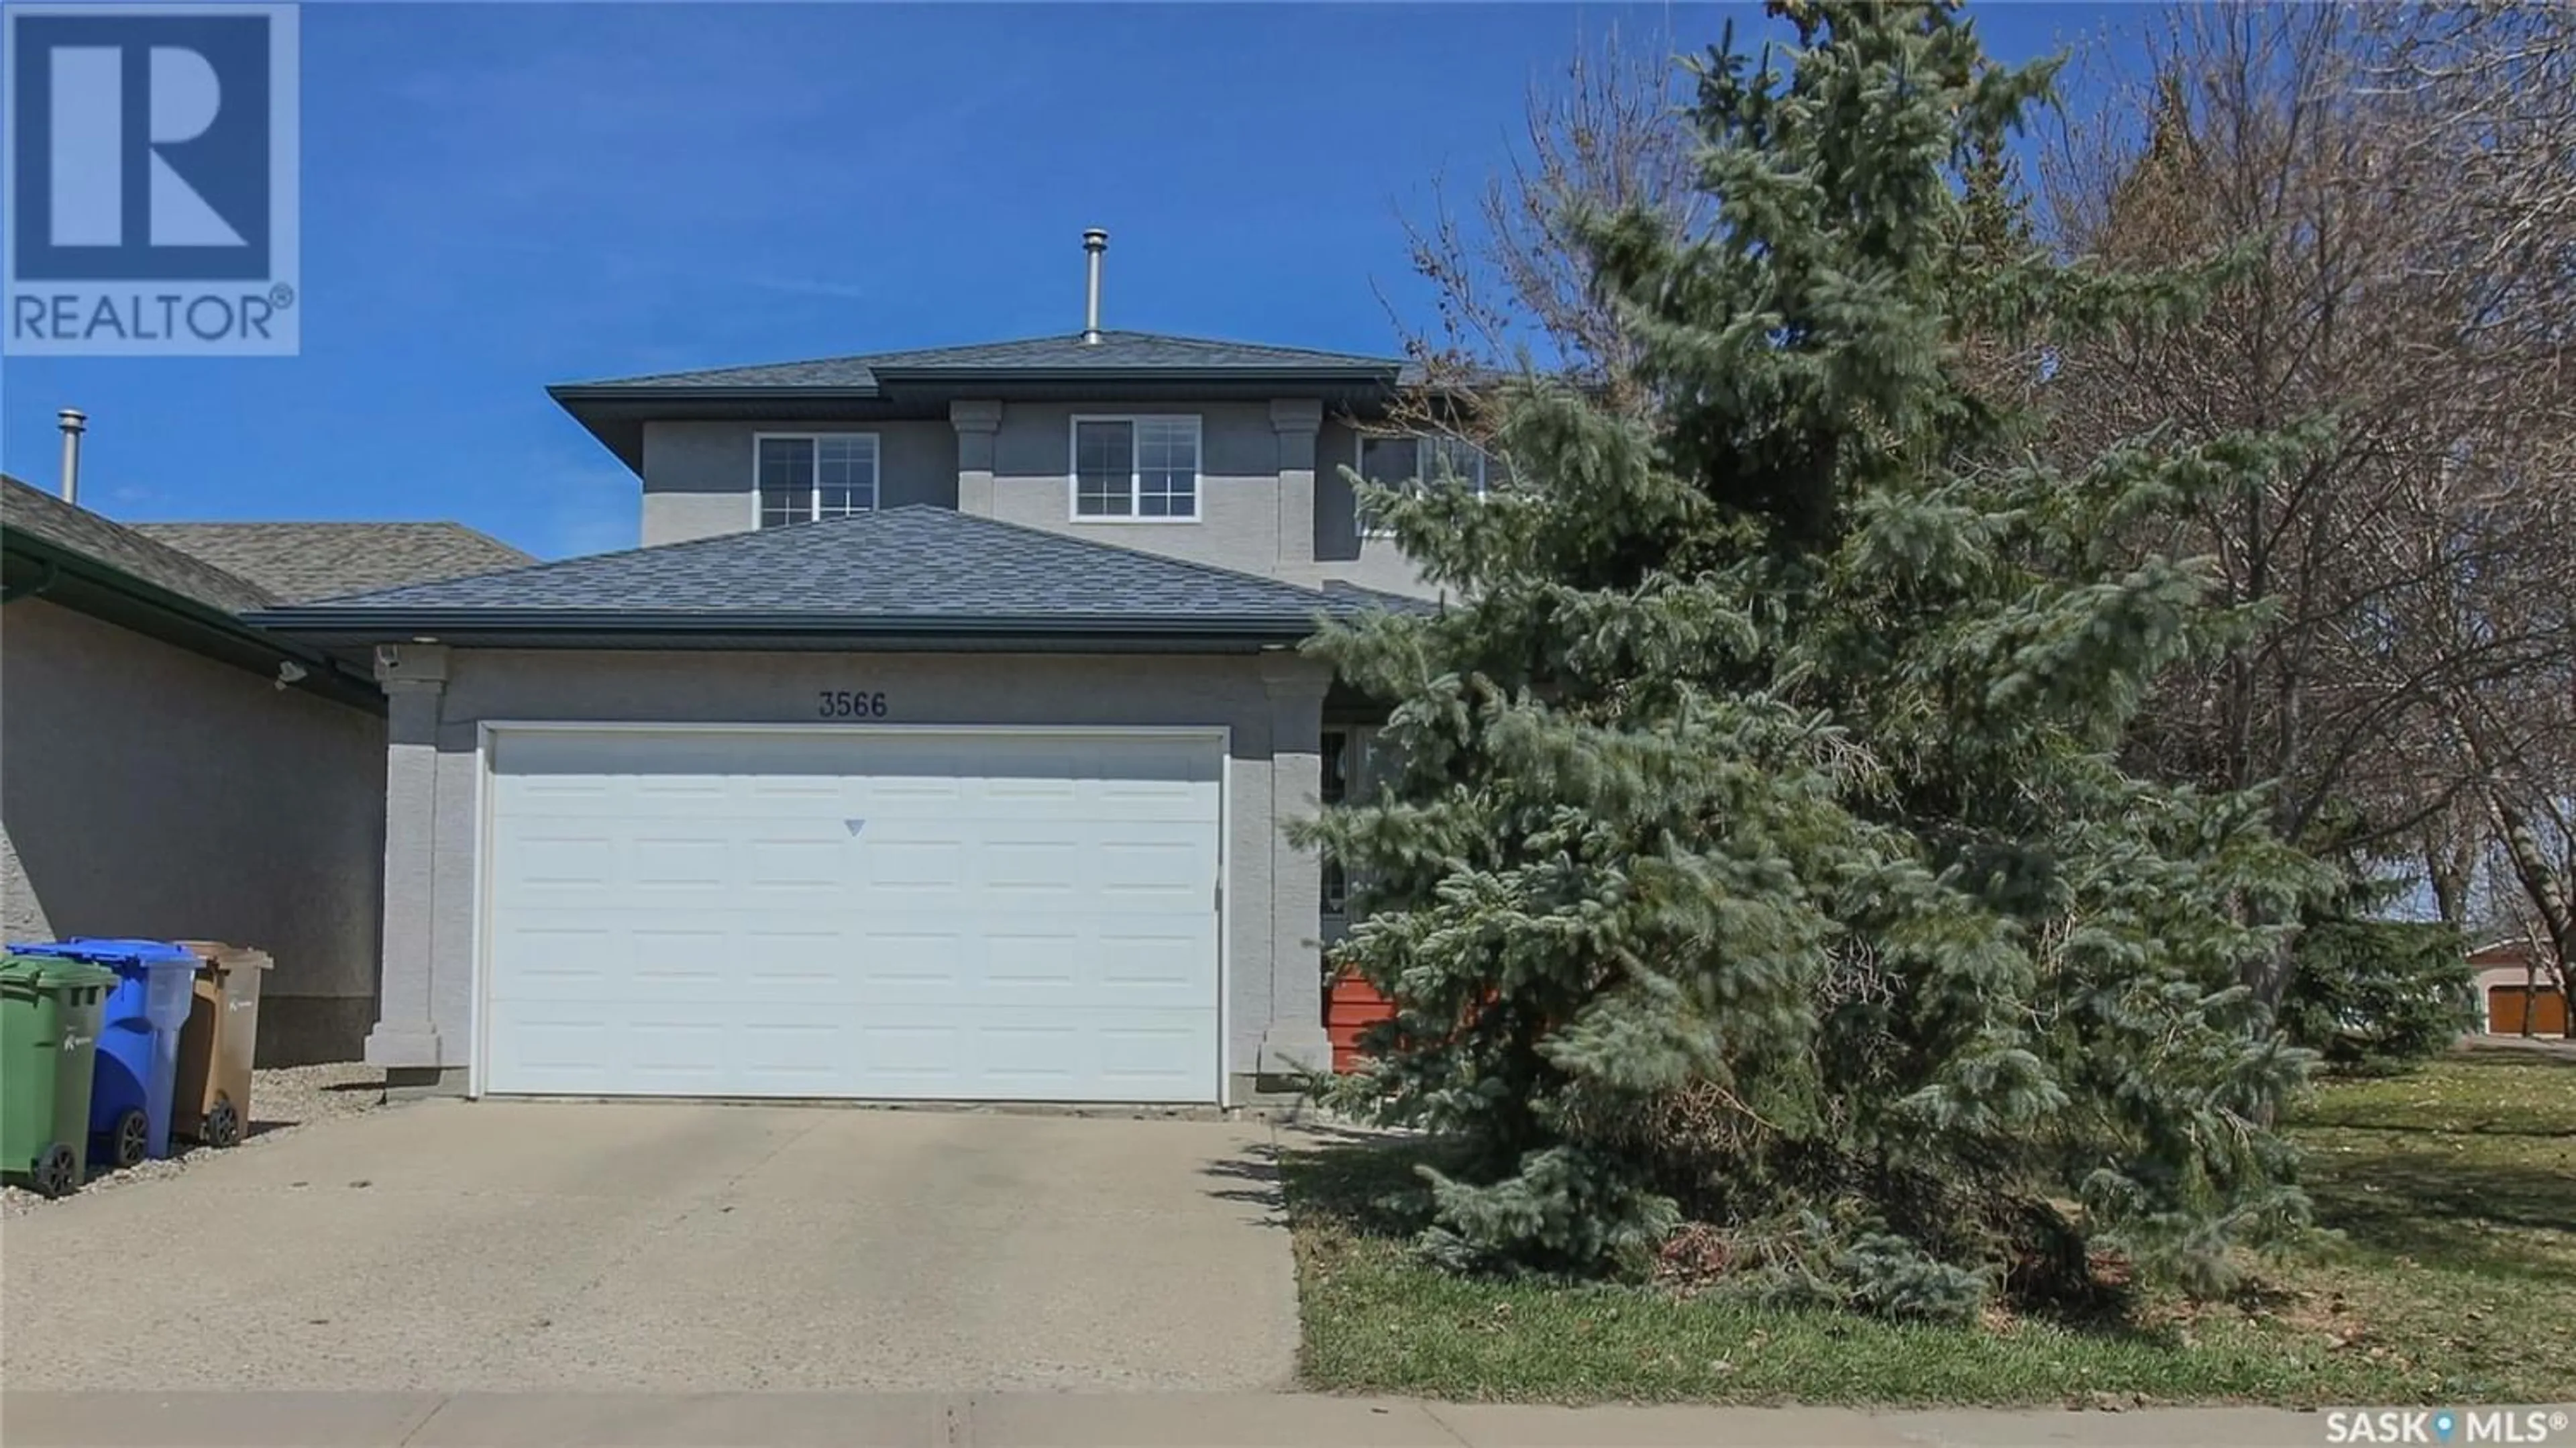 A pic from exterior of the house or condo for 3566 Waddell CRESCENT E, Regina Saskatchewan S4N7K6